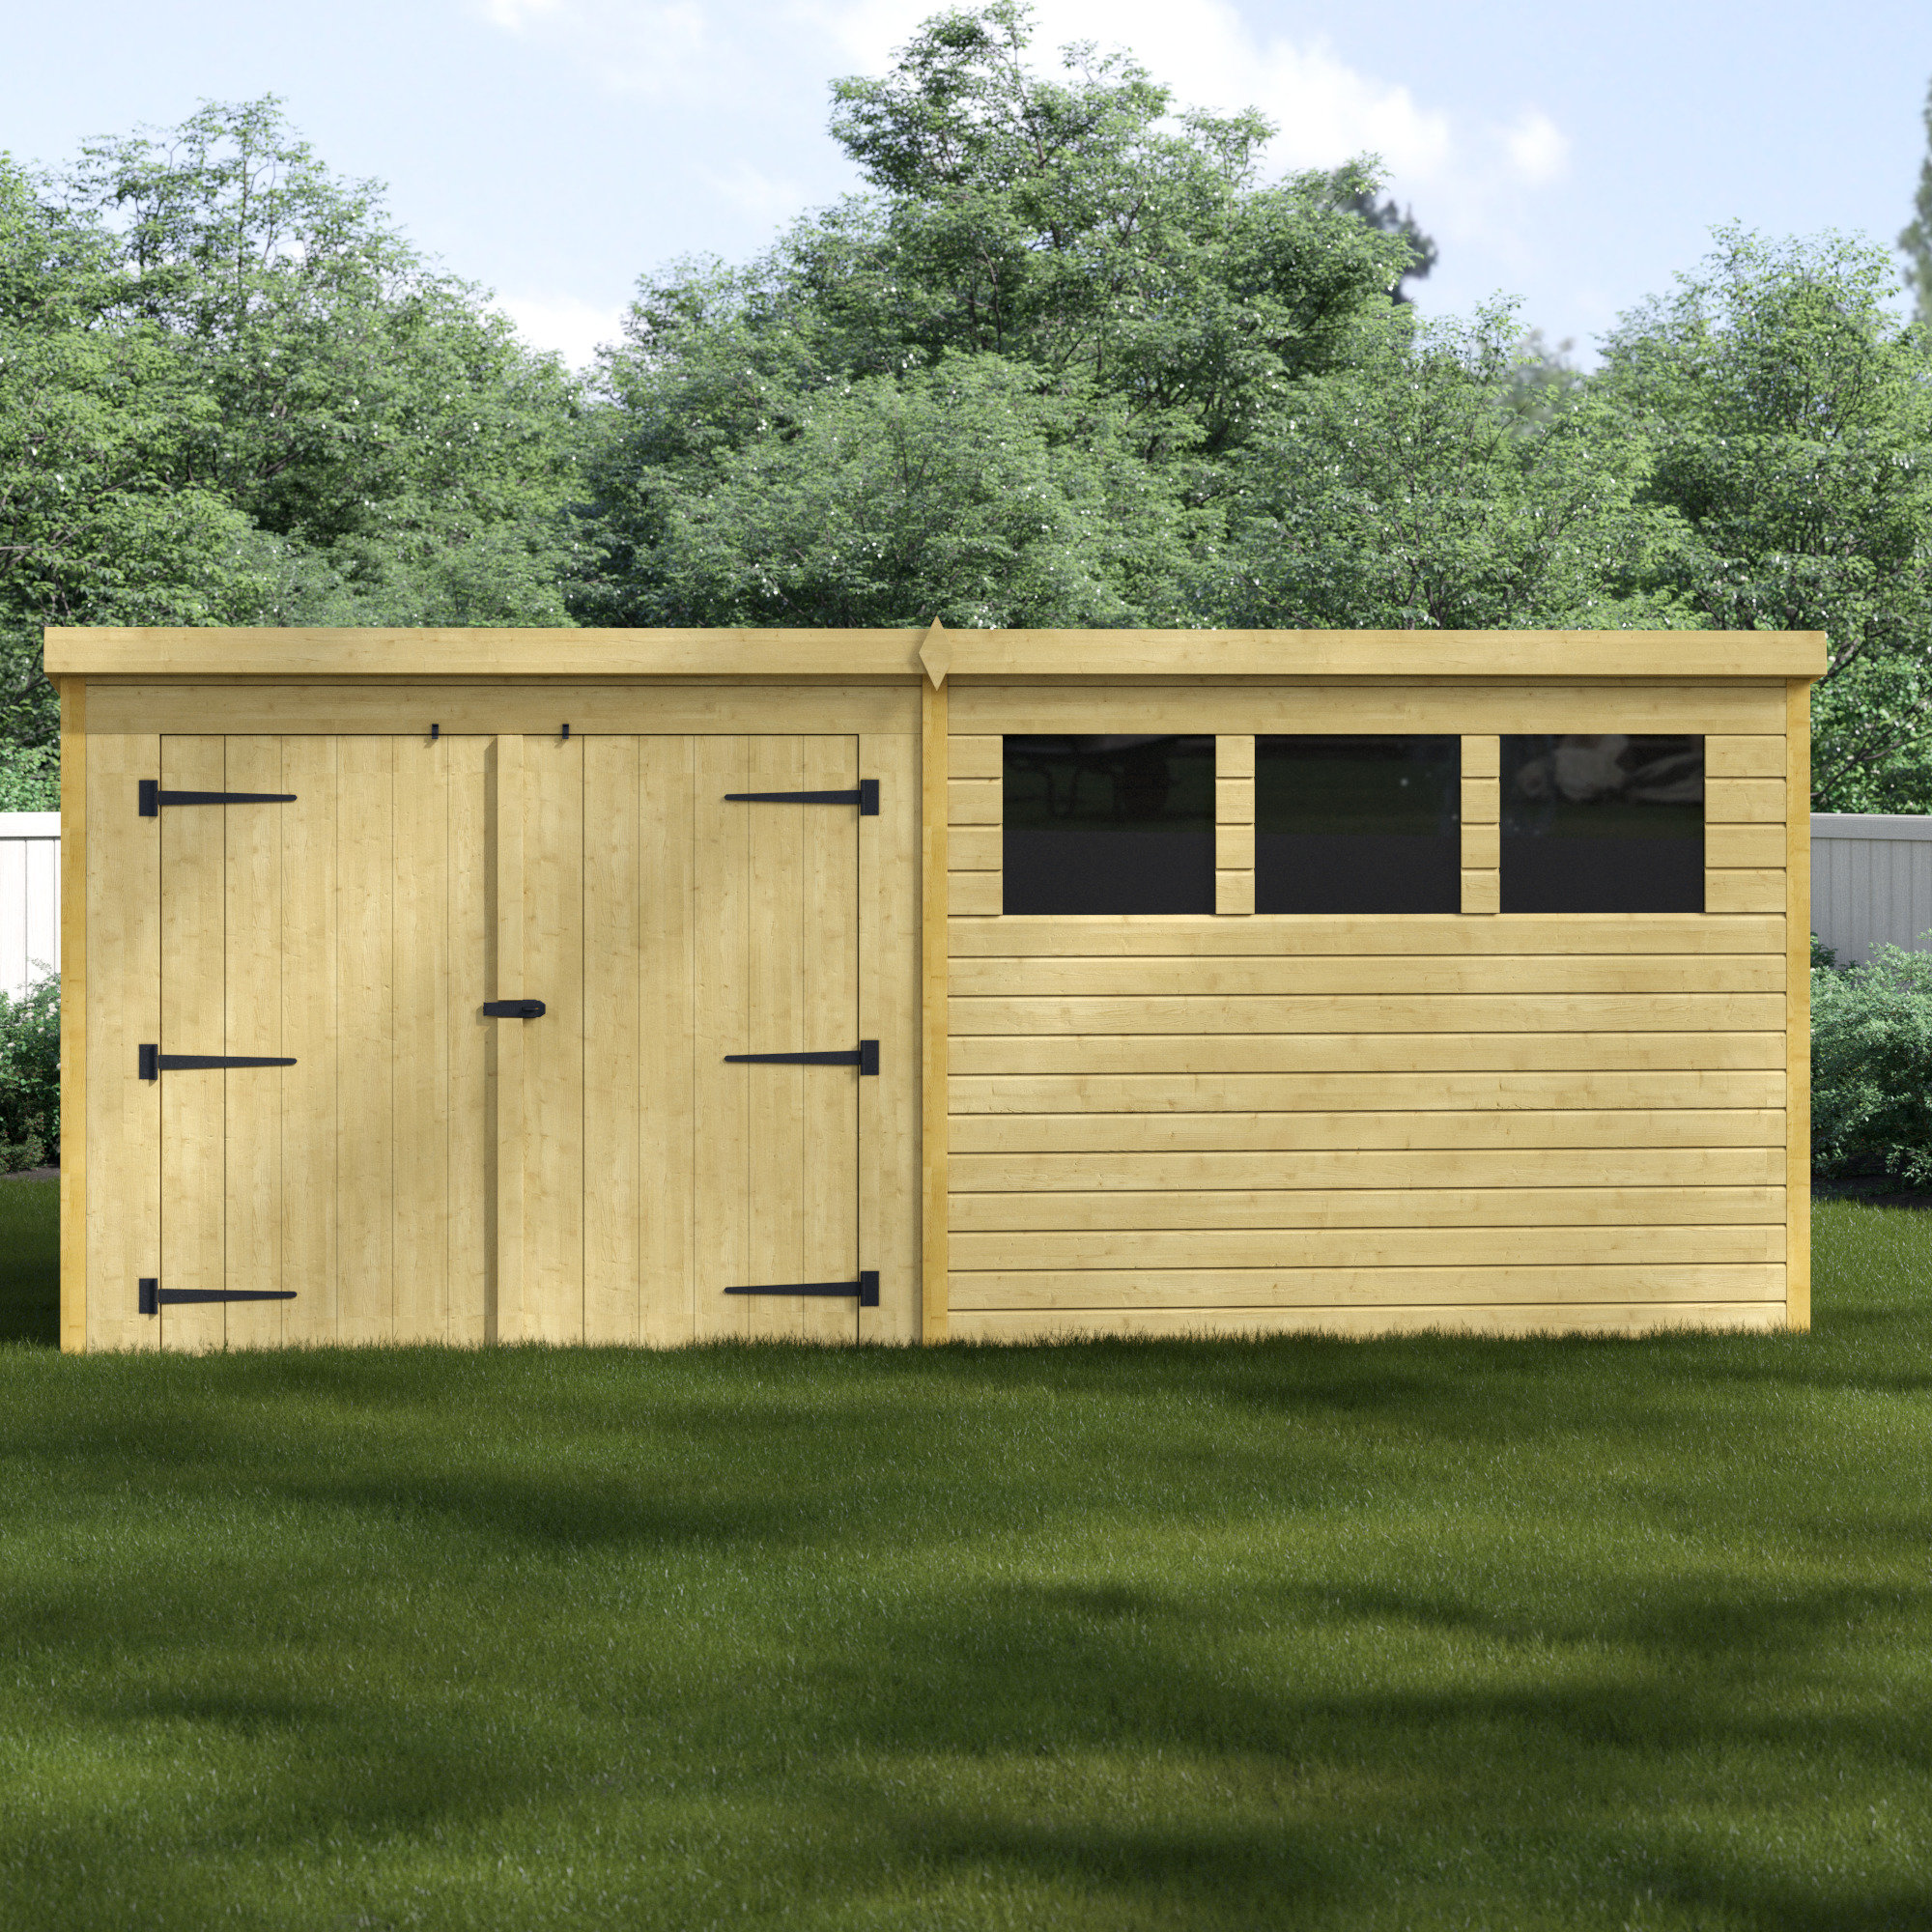 Wfx Utility 12 Ft W X 8 Ft D Solid Wood Garden Shed Reviews Wayfair Co Uk